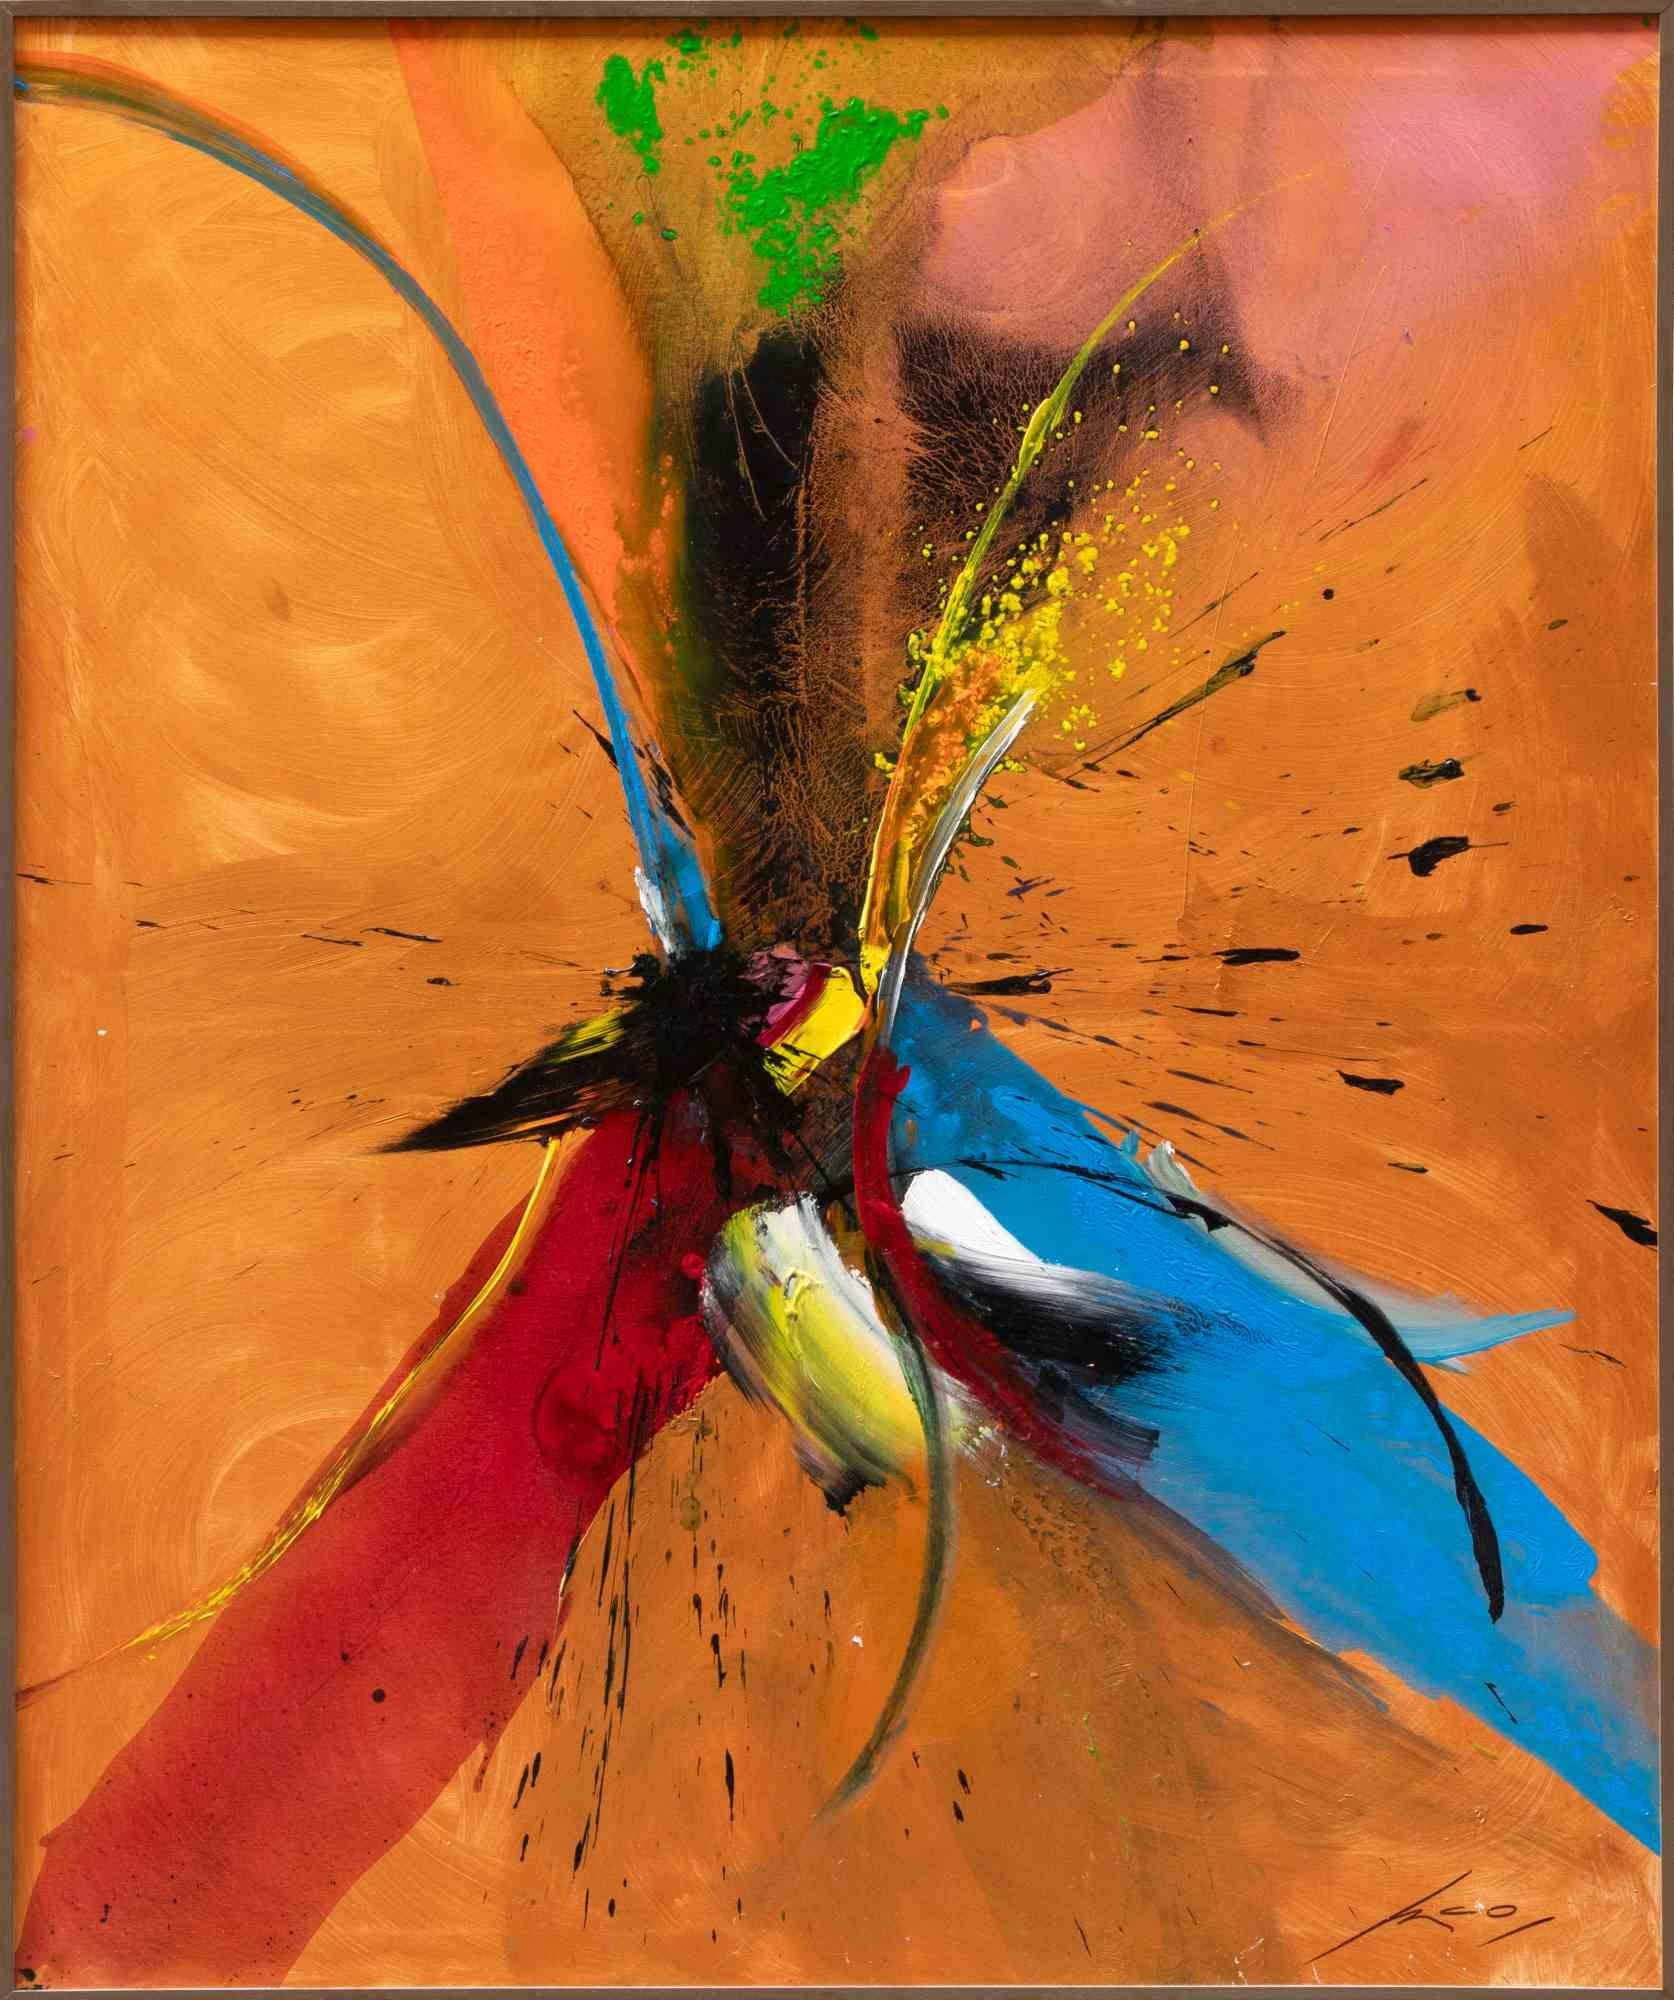 Abstract Composition is a contemporary artwork realized by the artist Nico Van Lucas.

Mixed colored Oil and Acrylic on Canvas.

Hand signed on the lower margin.

Signature on the back.

Nico Van Lucas is the artistic pseudonym of the Milanese